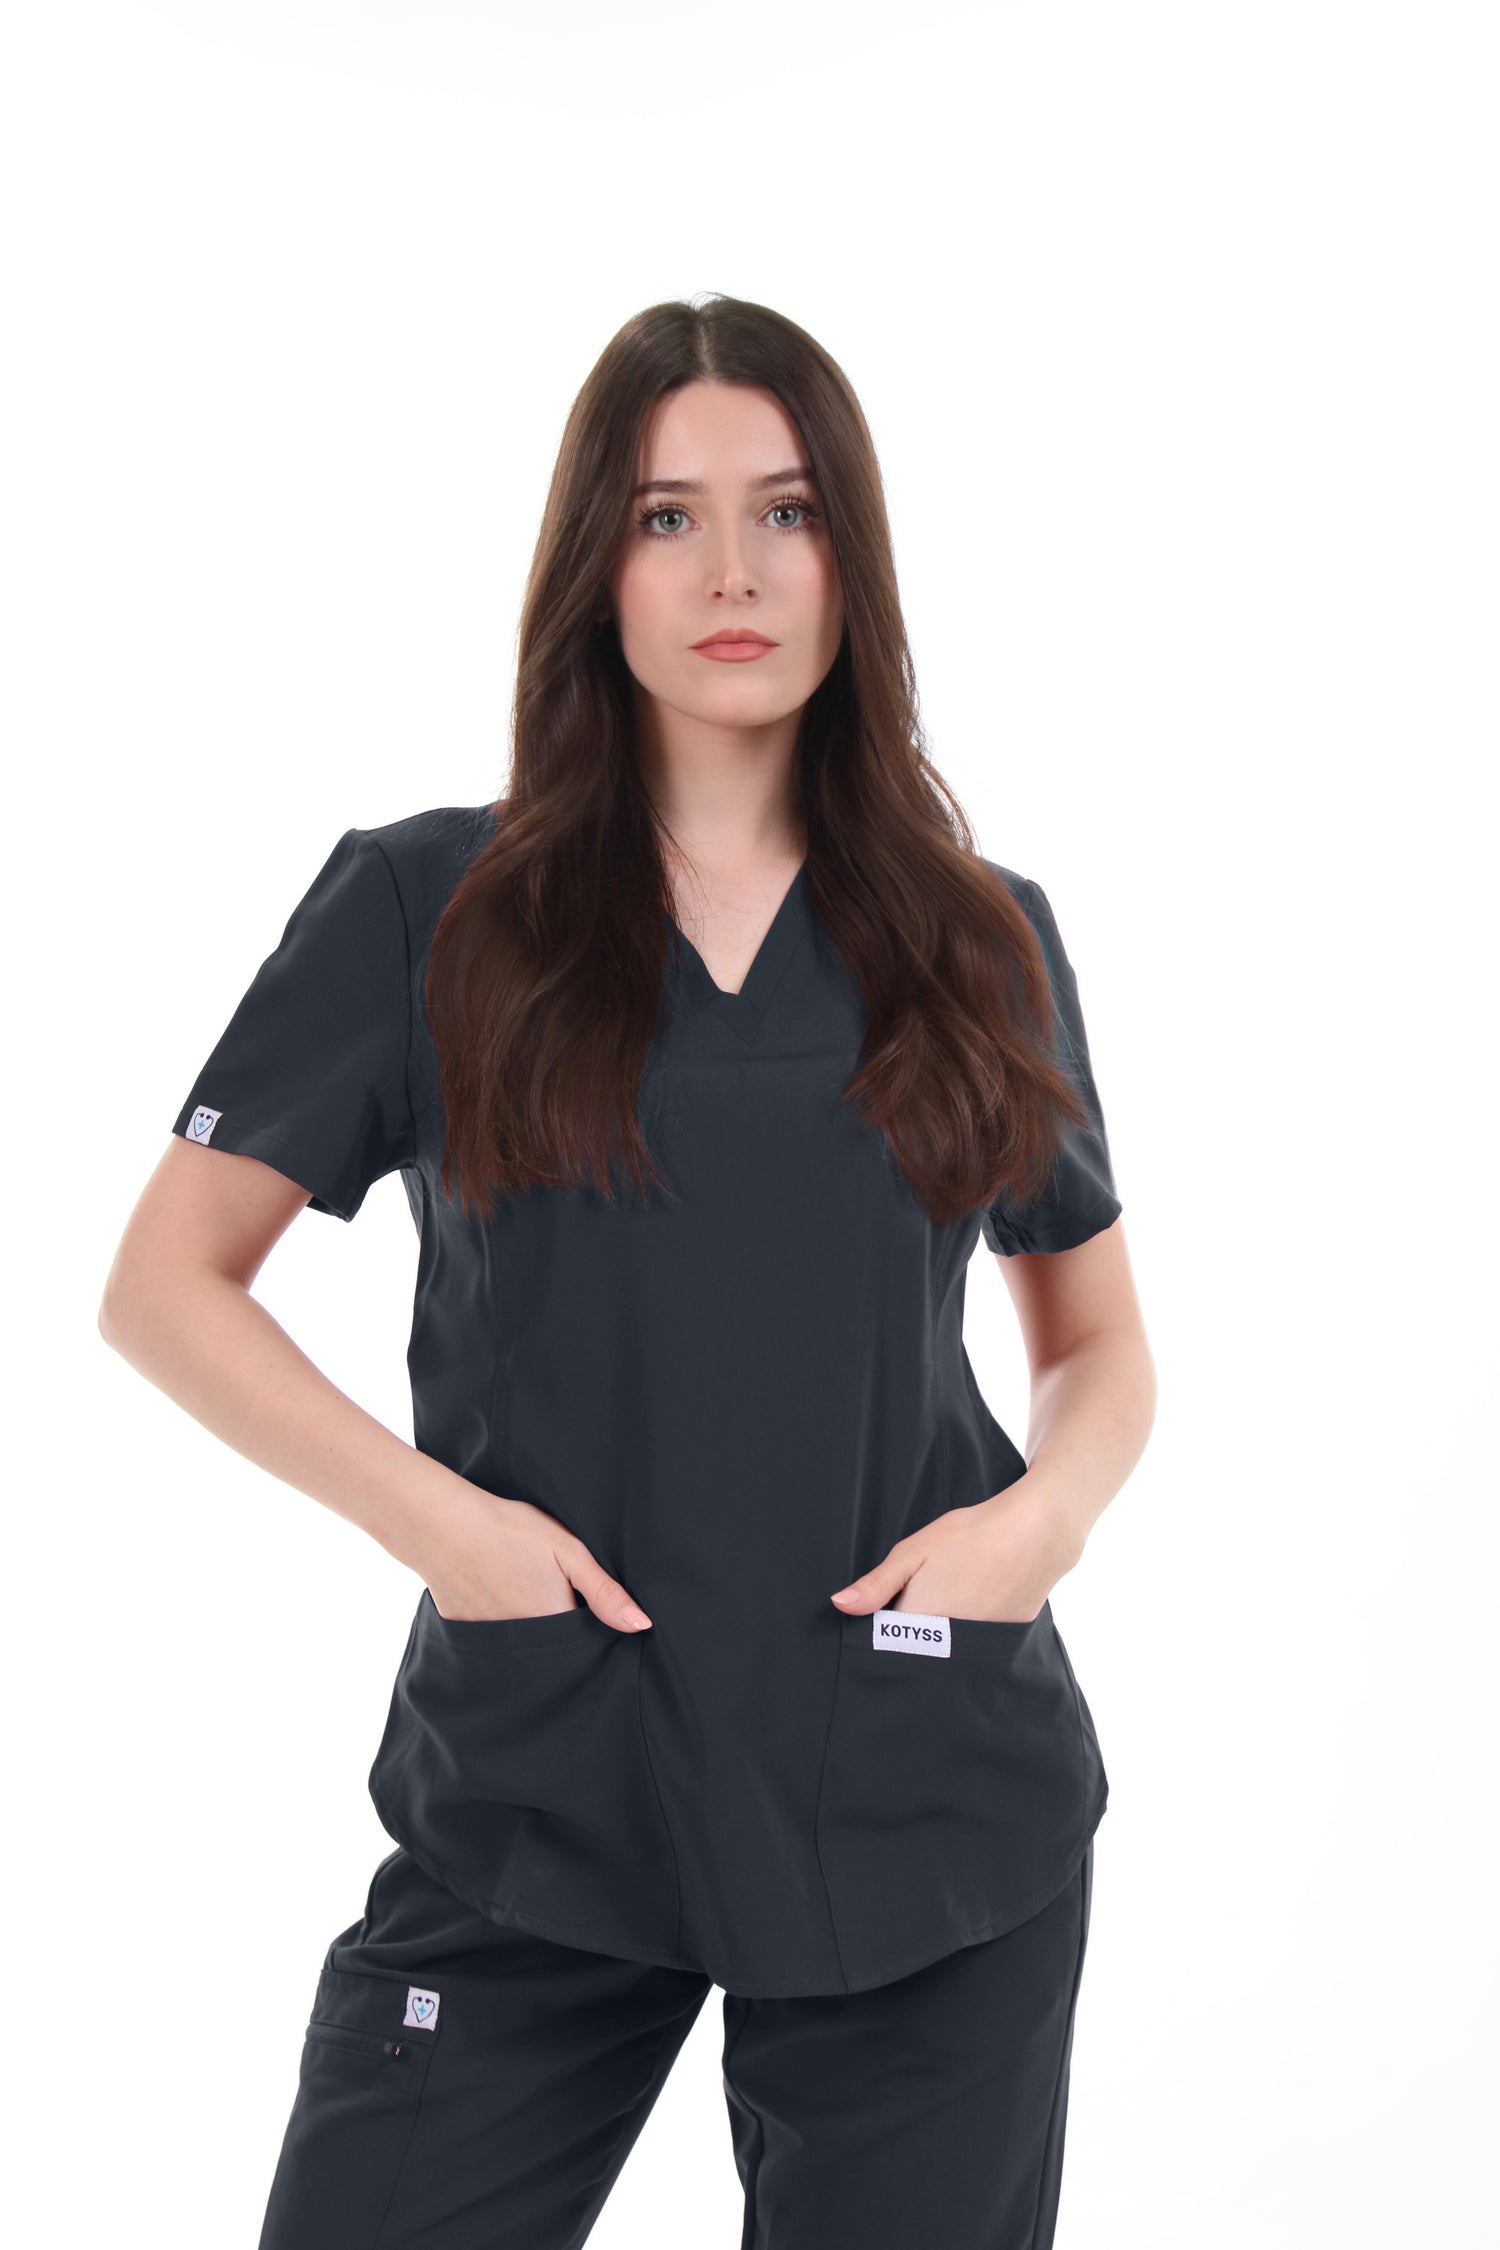 Types Of Accessories That Are Necessary For Nurses